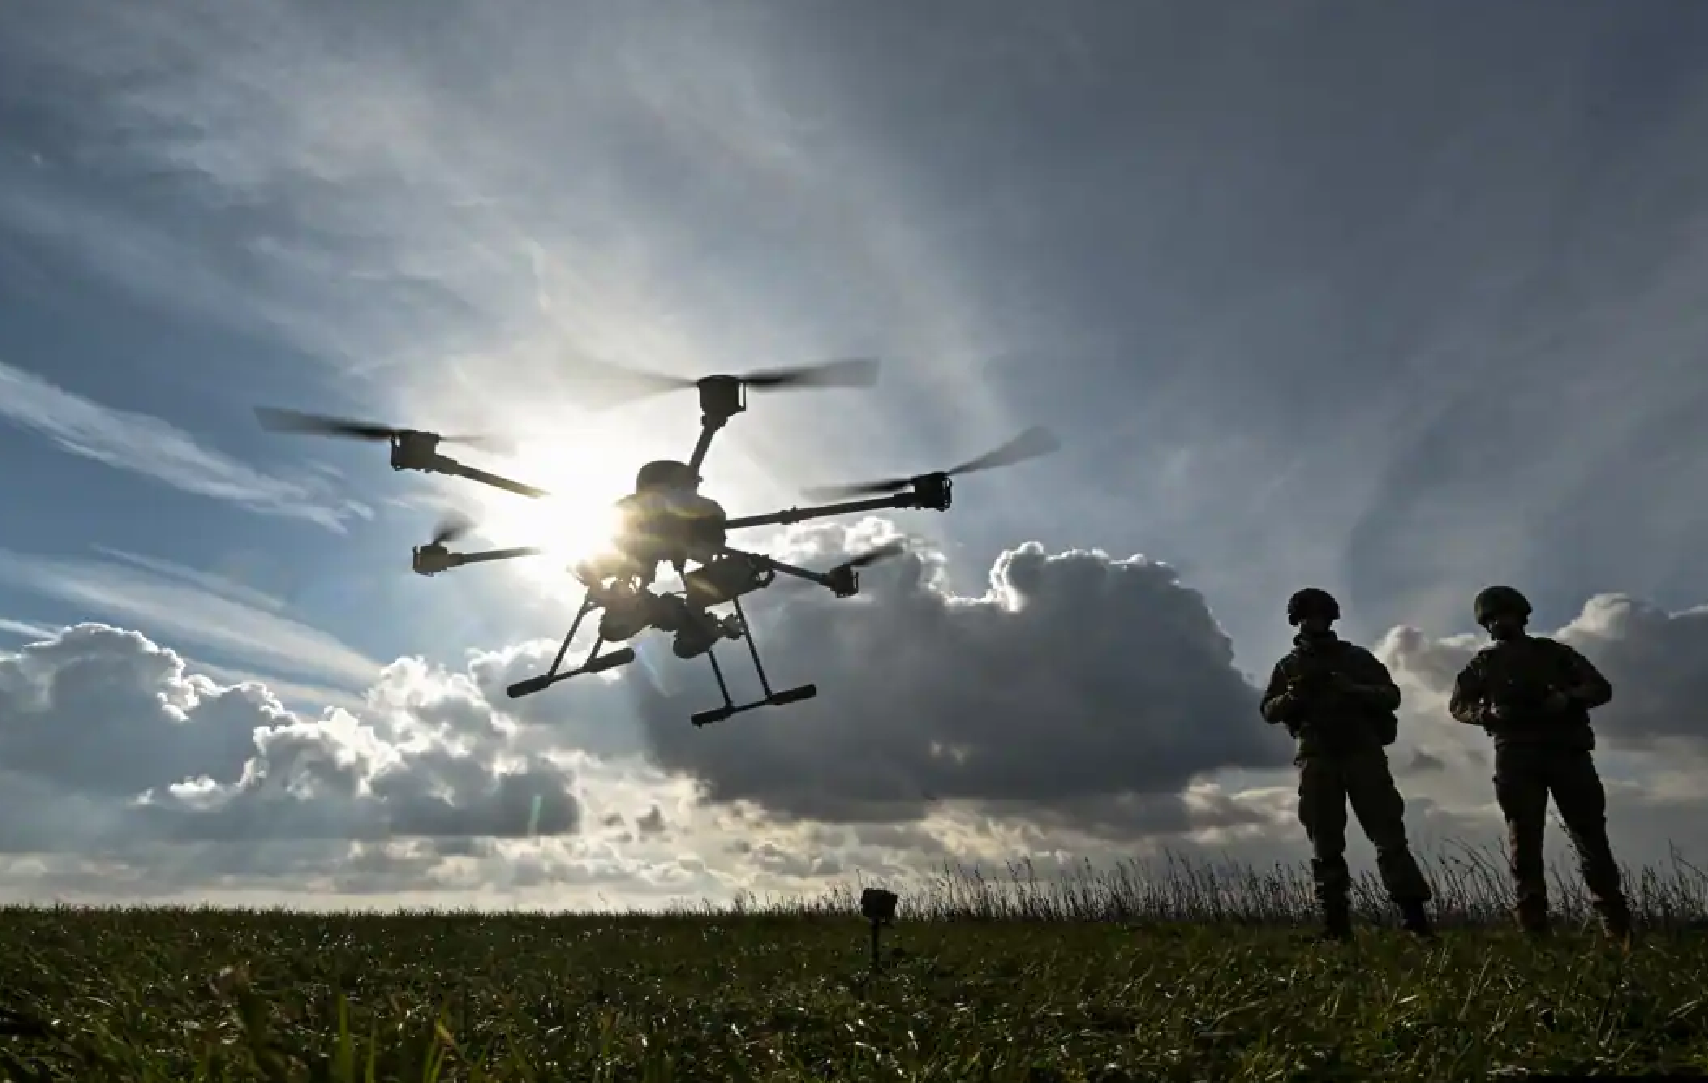 Air Combat between Drones Will Soon Be a Reality But it may not look like what you think